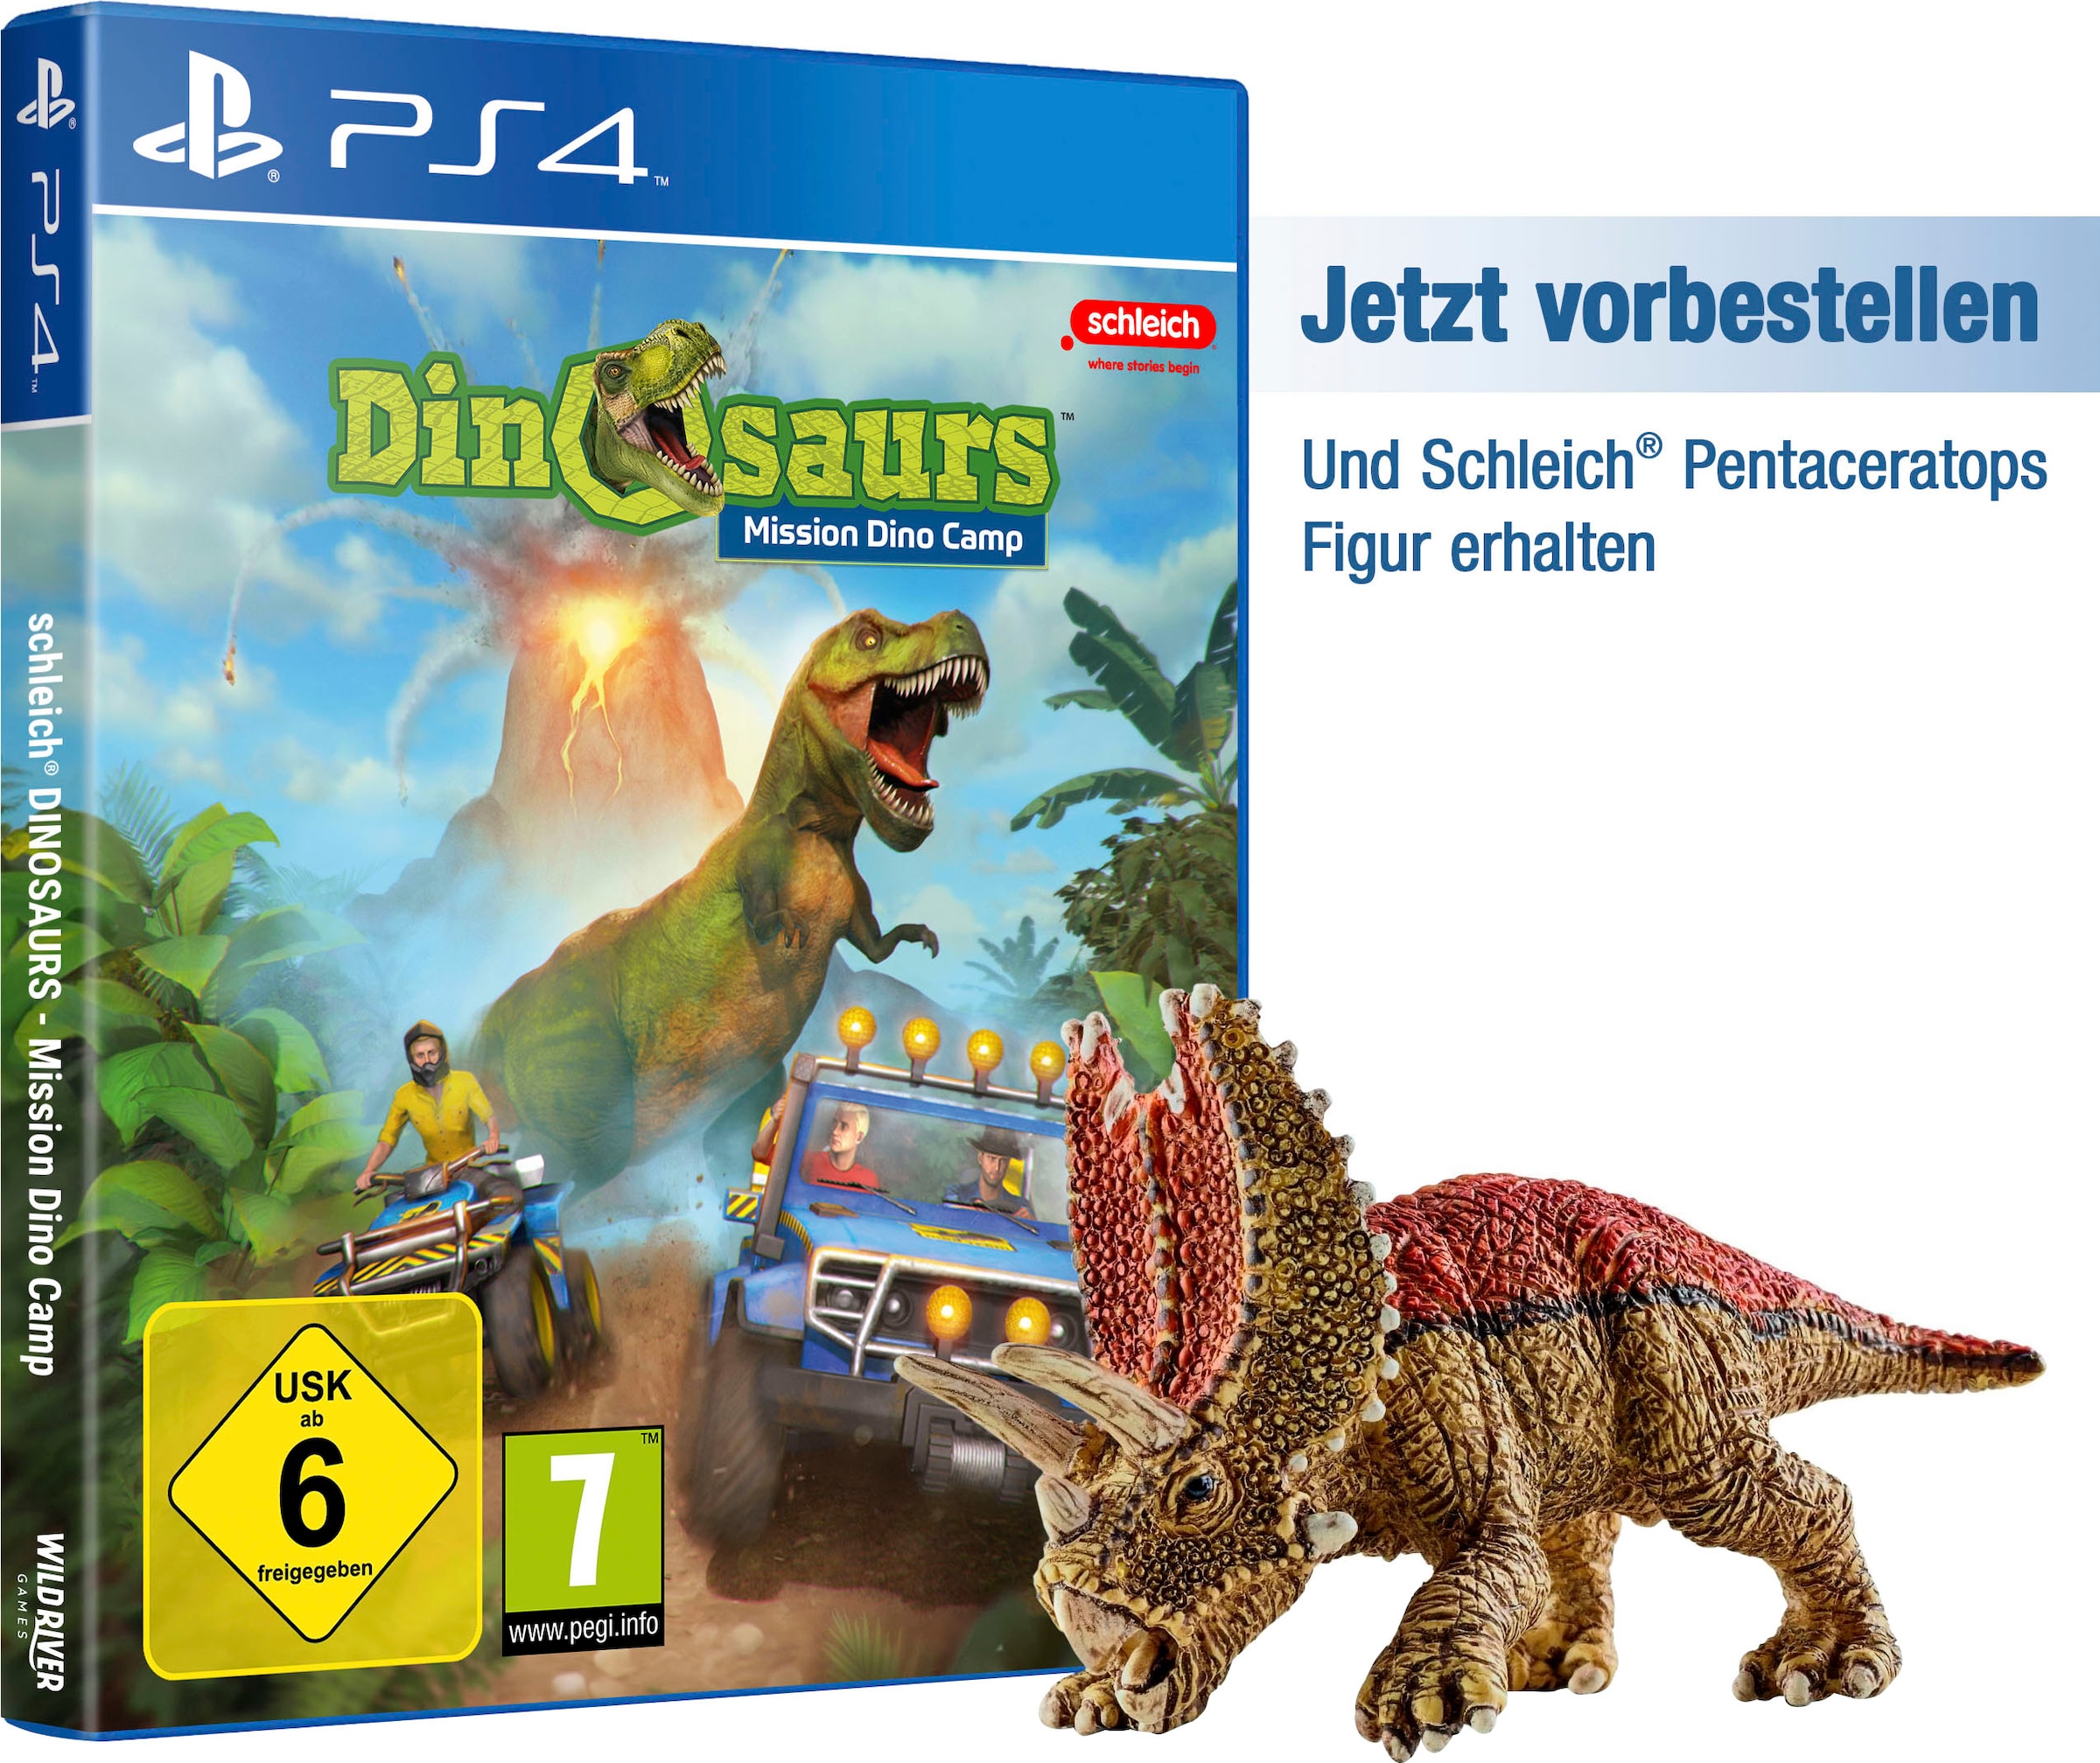 Mission Software Dino »Dinosaurs: Spielesoftware 4 PlayStation Camp«, bei Pyramide